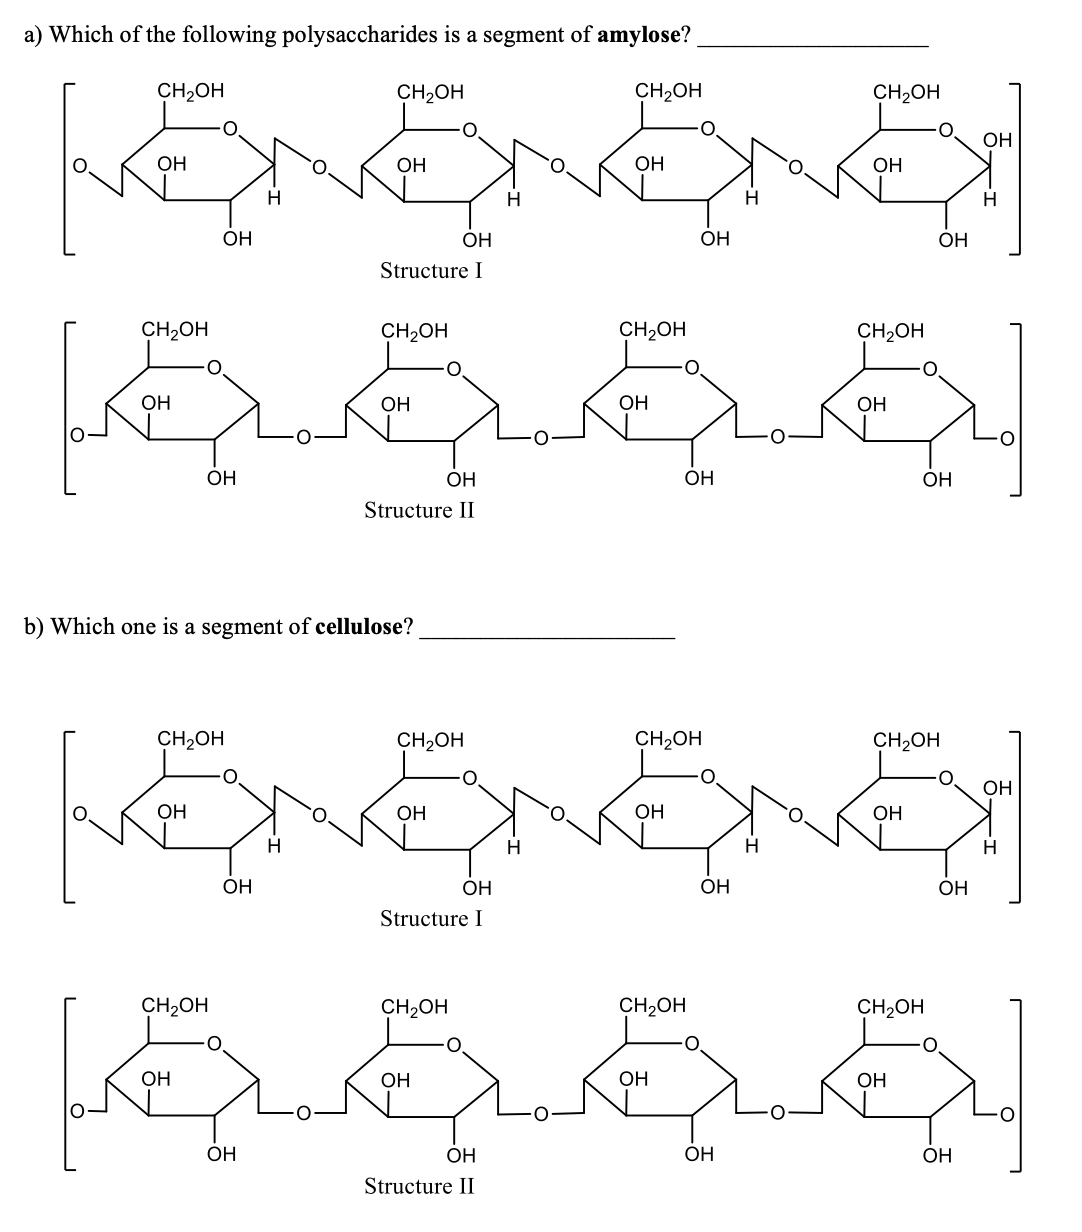 a) Which of the following polysaccharides is a segment of amylose?
CH2OH
CH2OH
CH2OH
CH2OH
OH
OH
OH
OH
ОН
H
H
H
OH
OH
OH
ОН
Structure I
CH2OH
CH2OH
CH2OH
CH2OH
OH
ОН
OH
ОН
OH
OH
ОН
OH
Structure II
b) Which one is a segment of cellulose?
CH2OH
CH2OH
CH2OH
CH2OH
ОН
OH
OH
ОН
ОН
OH
ОН
ОН
ОН
Structure I
CH2OH
CH2OH
CH2OH
CH2OH
O.
ОН
ОН
OH
ОН
OH
OH
OH
OH
Structure II
